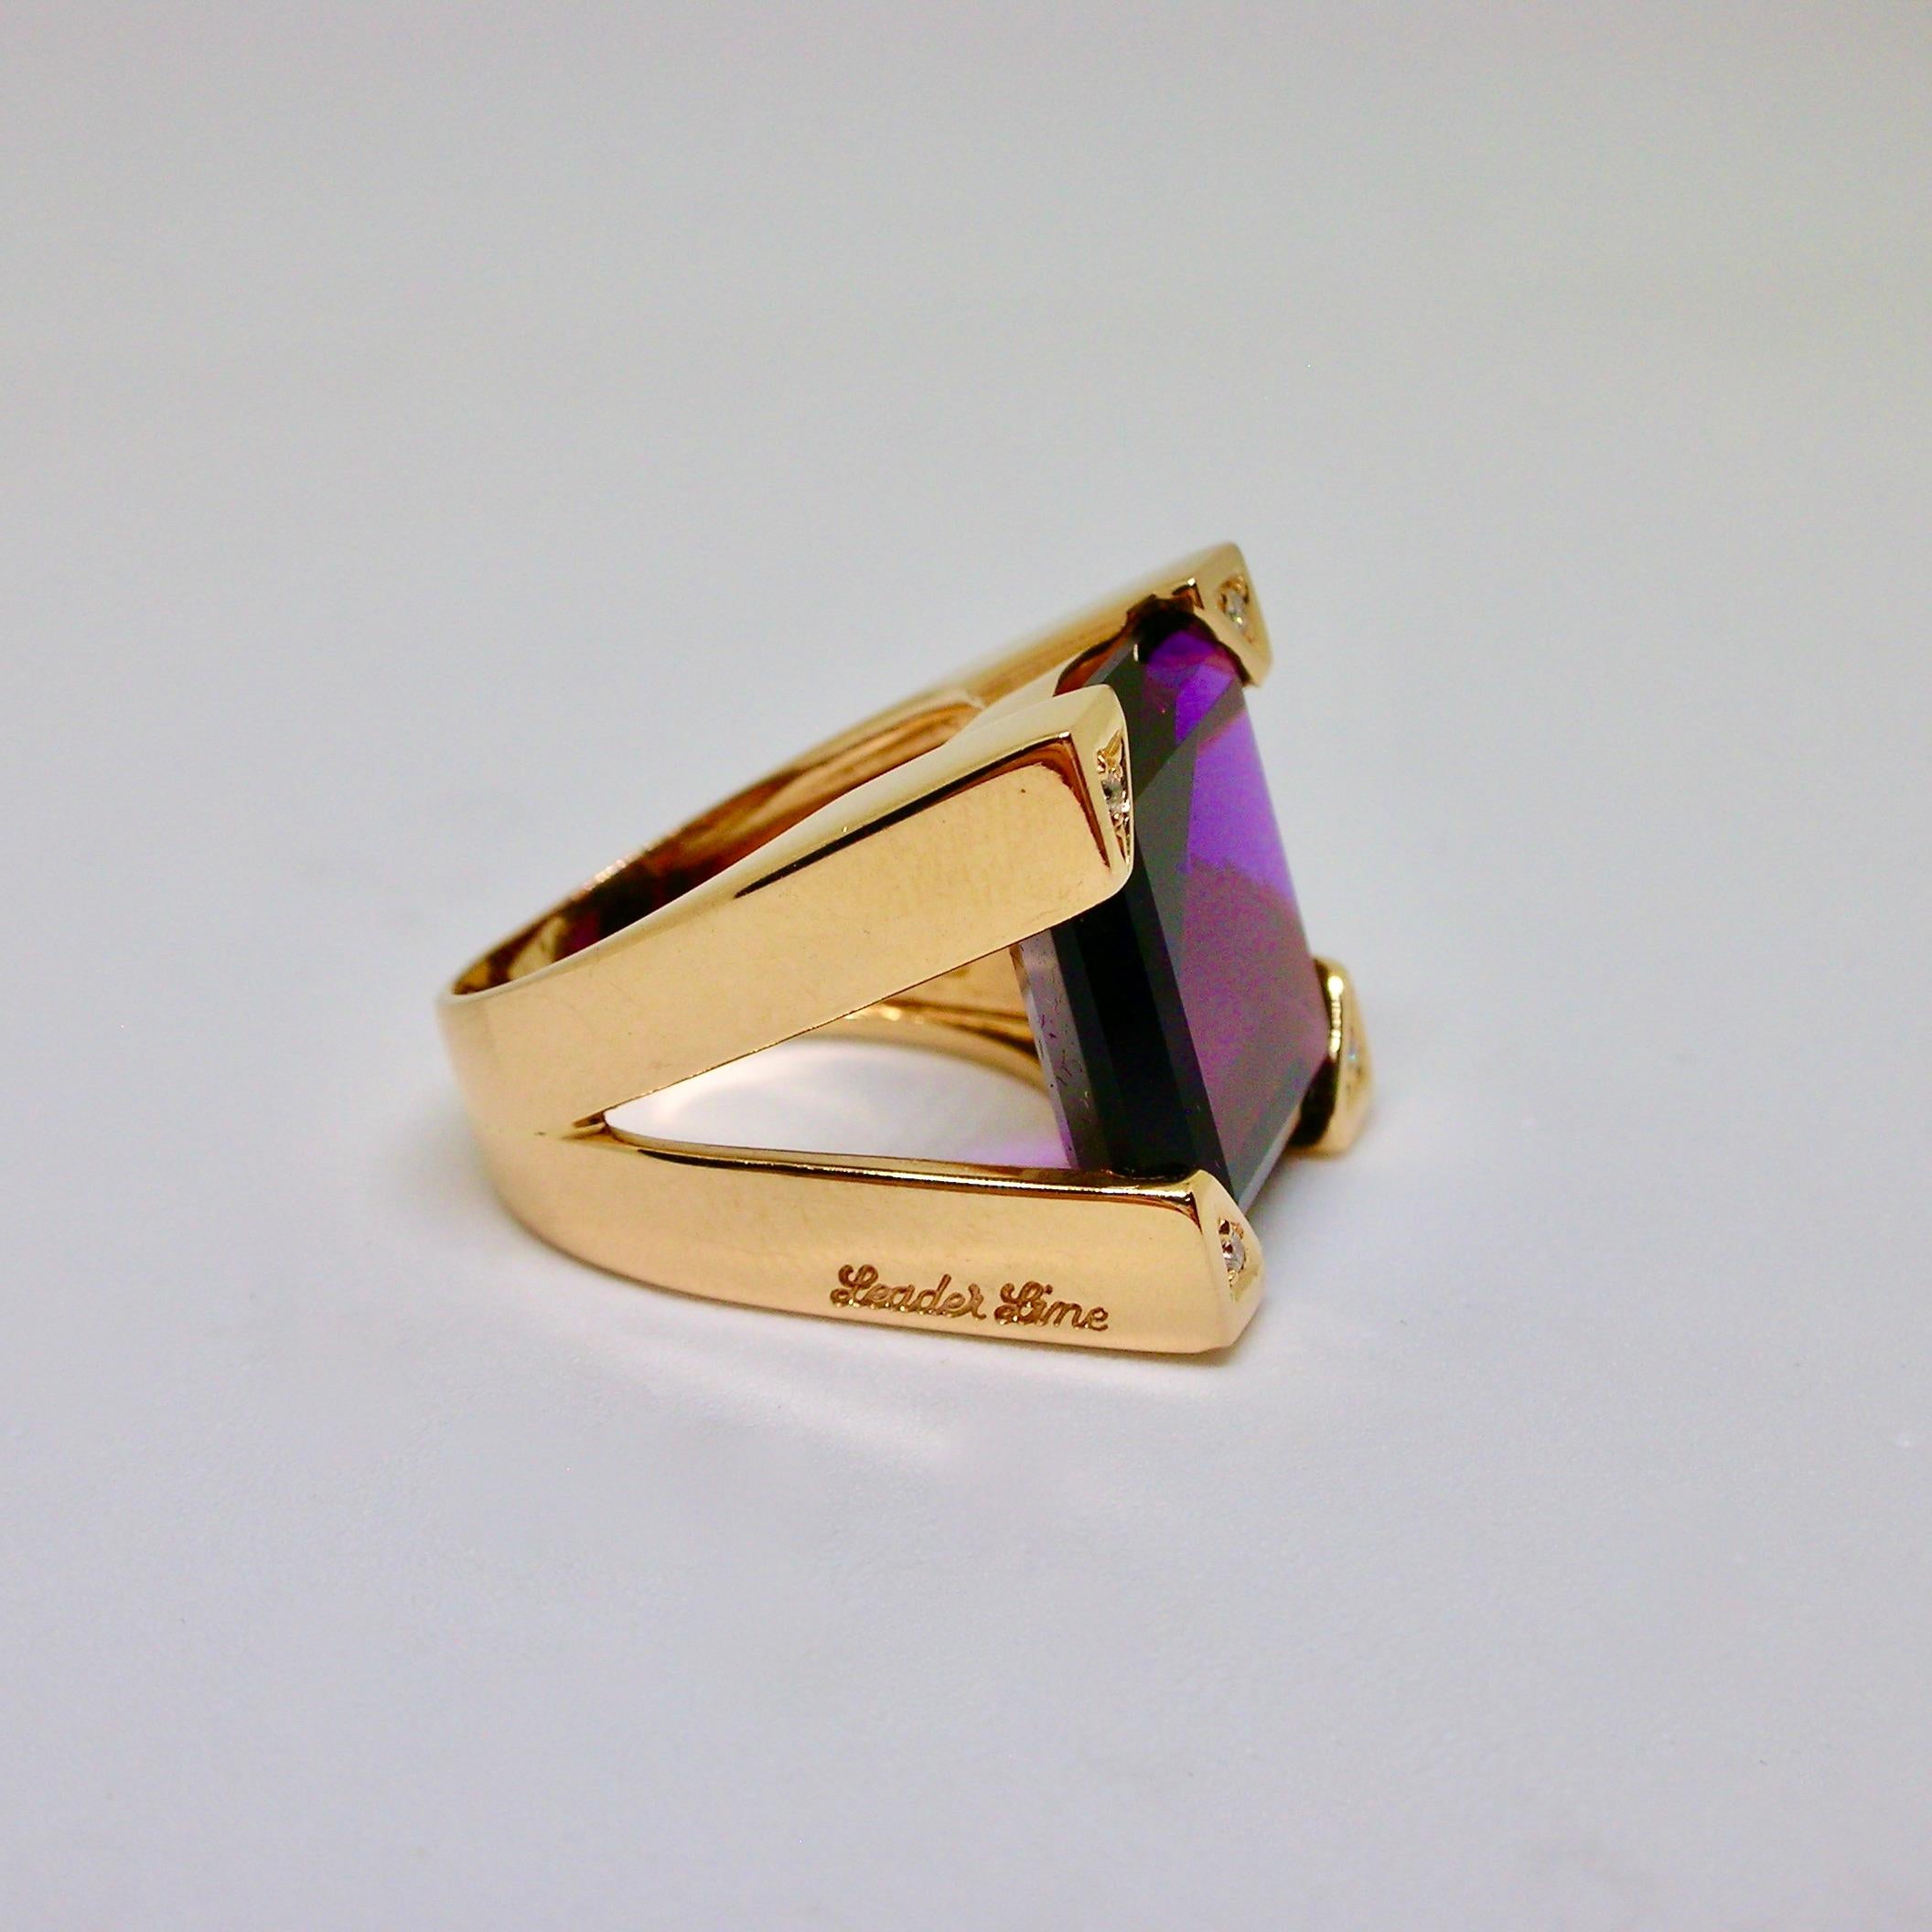 Vintage ring set in 18 carat rose gold, 1980s period circa signed Leaderline of Italian manufacture, with unusual carré cut amethyst decorated by small round cut diamonds. 